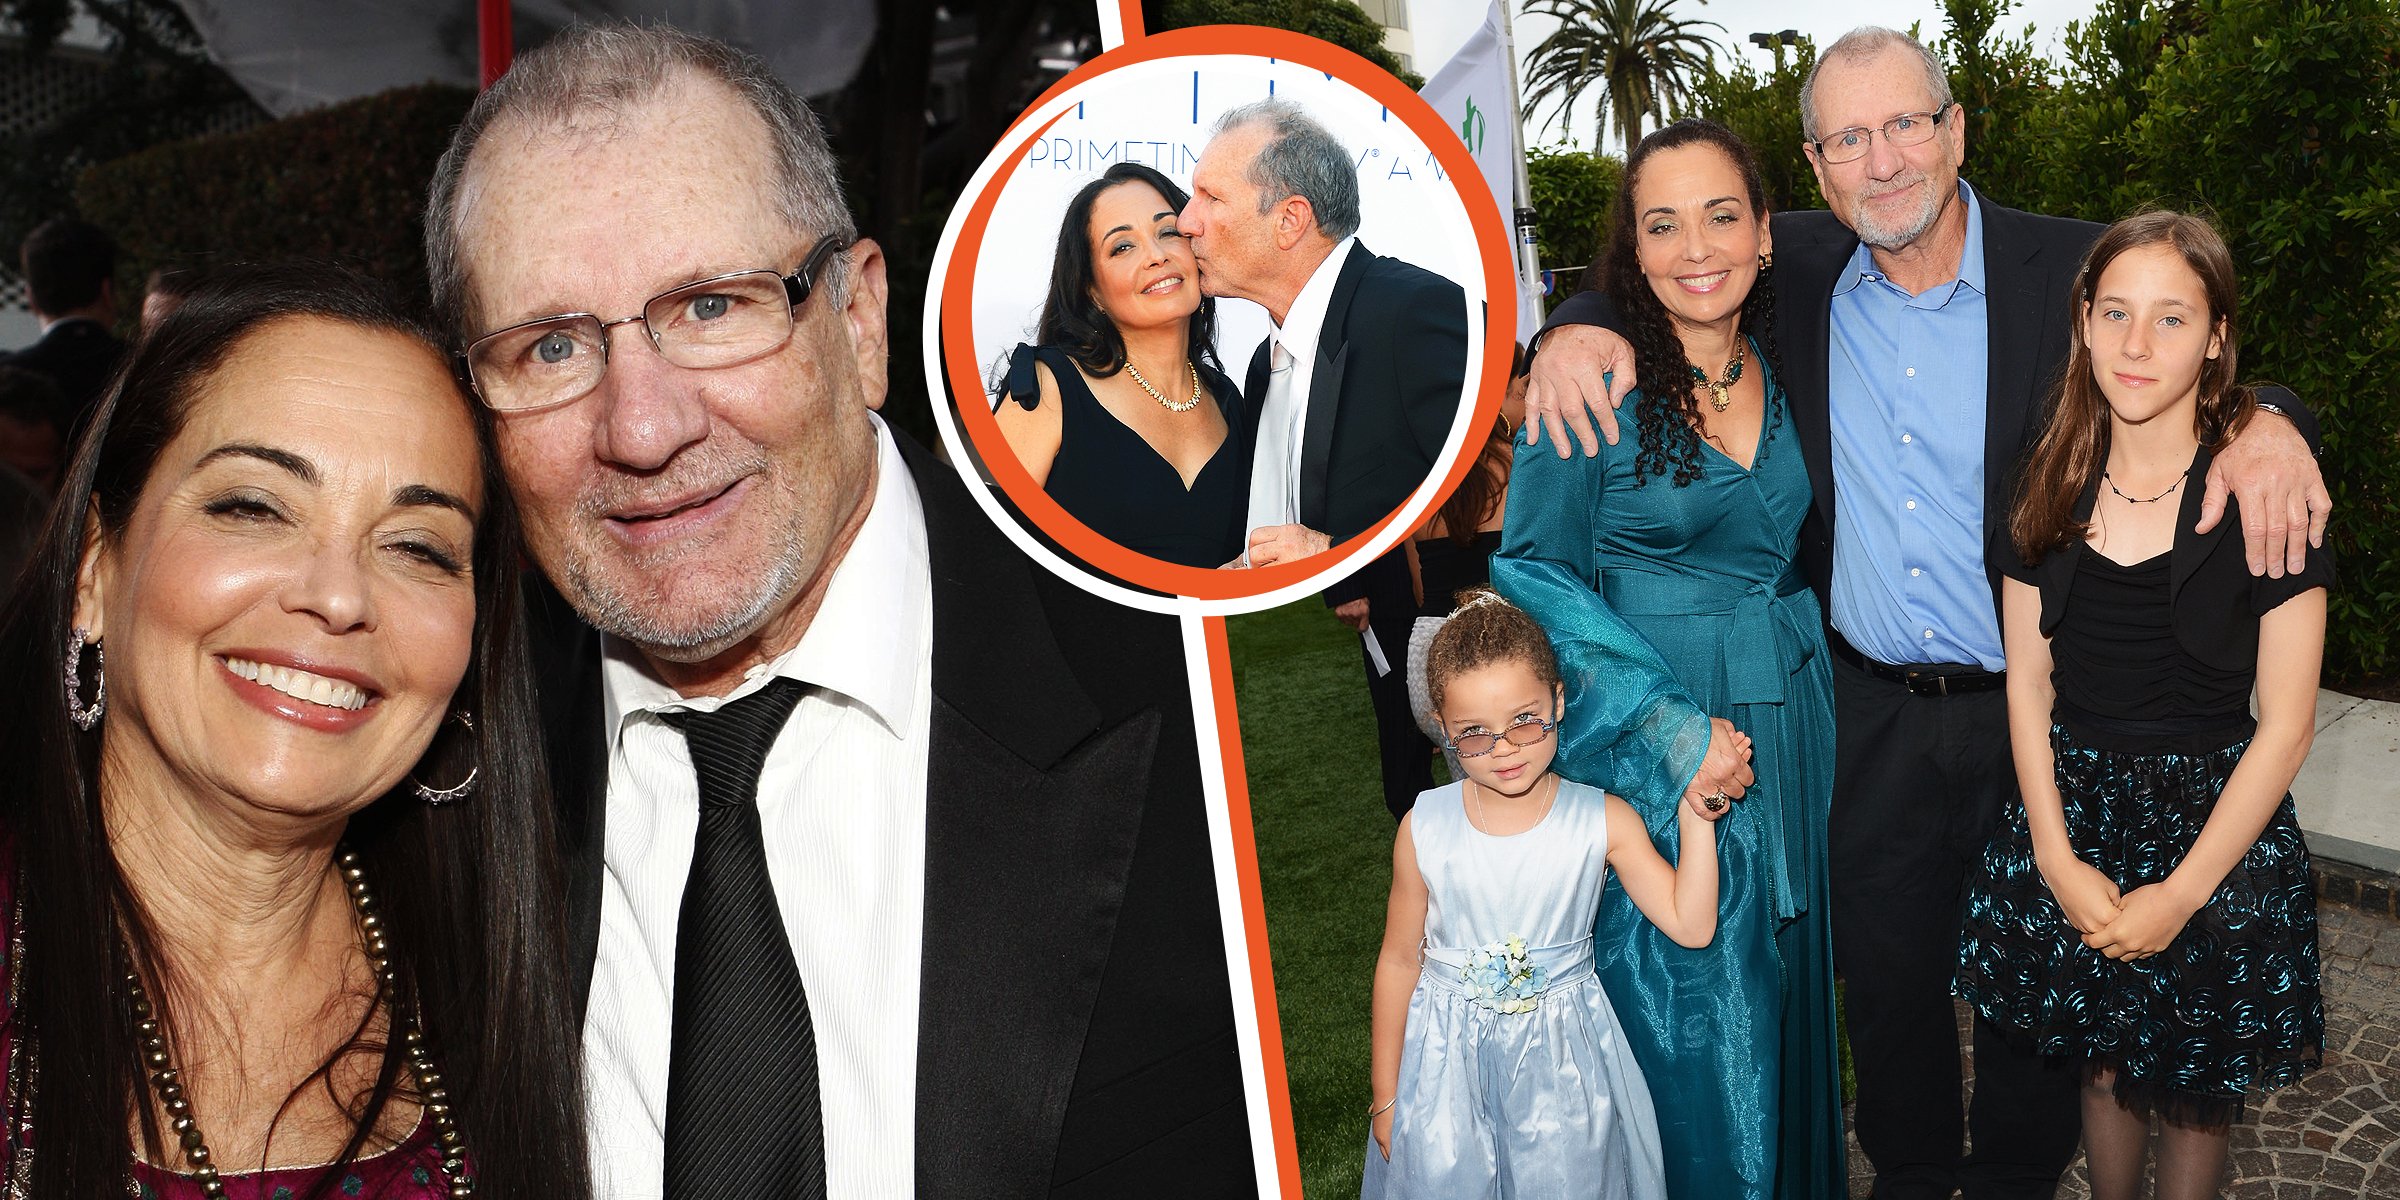 Catherin Rusoff and Ed O'Neill | Catherin Rusoff and Ed O'Neill | Sophia O'Neill, Catherin Rusoff, Ed O'Neill, and Claire O'Neill | Source: Getty Images